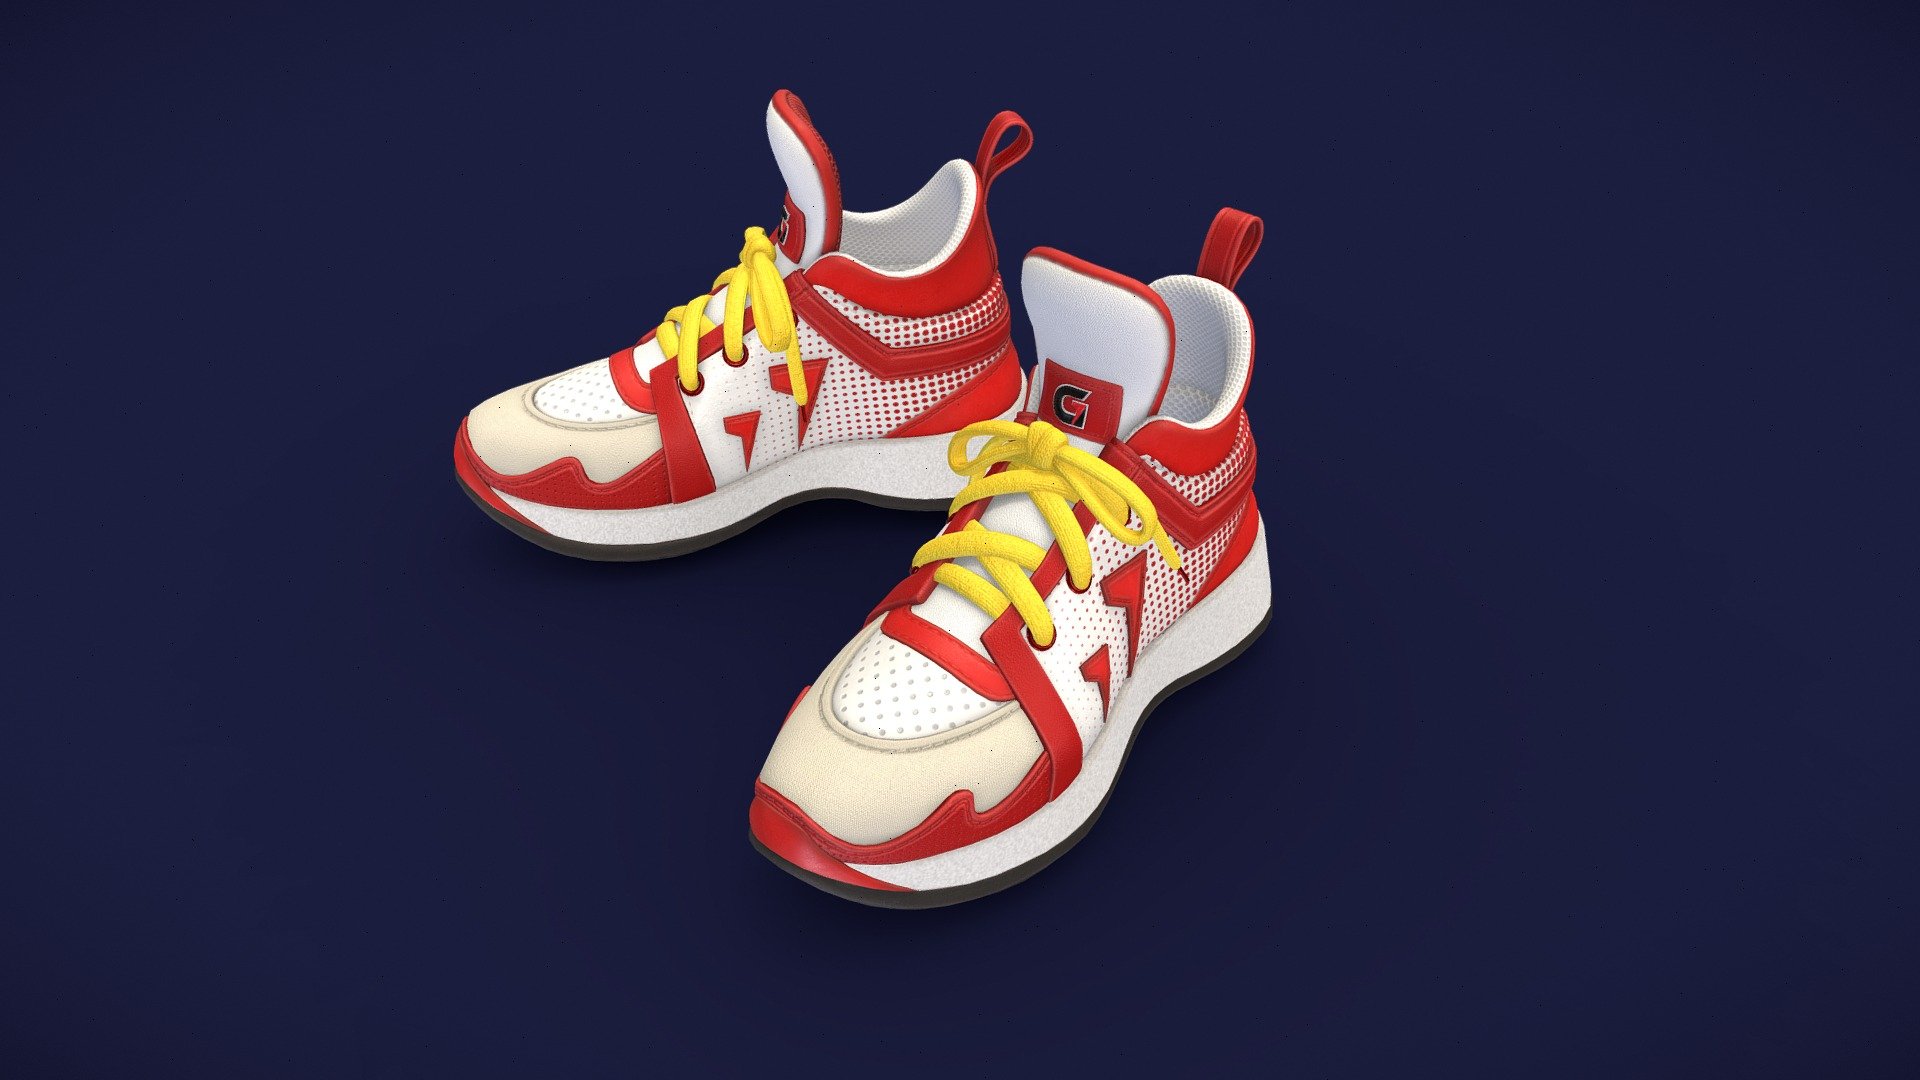 The pair of shoes was conceptualized and designed by the Gianty team
for running enthusiasts.
Hope You Like It - Shoes PBR Gianty - 3D model by GIANTY 3d model